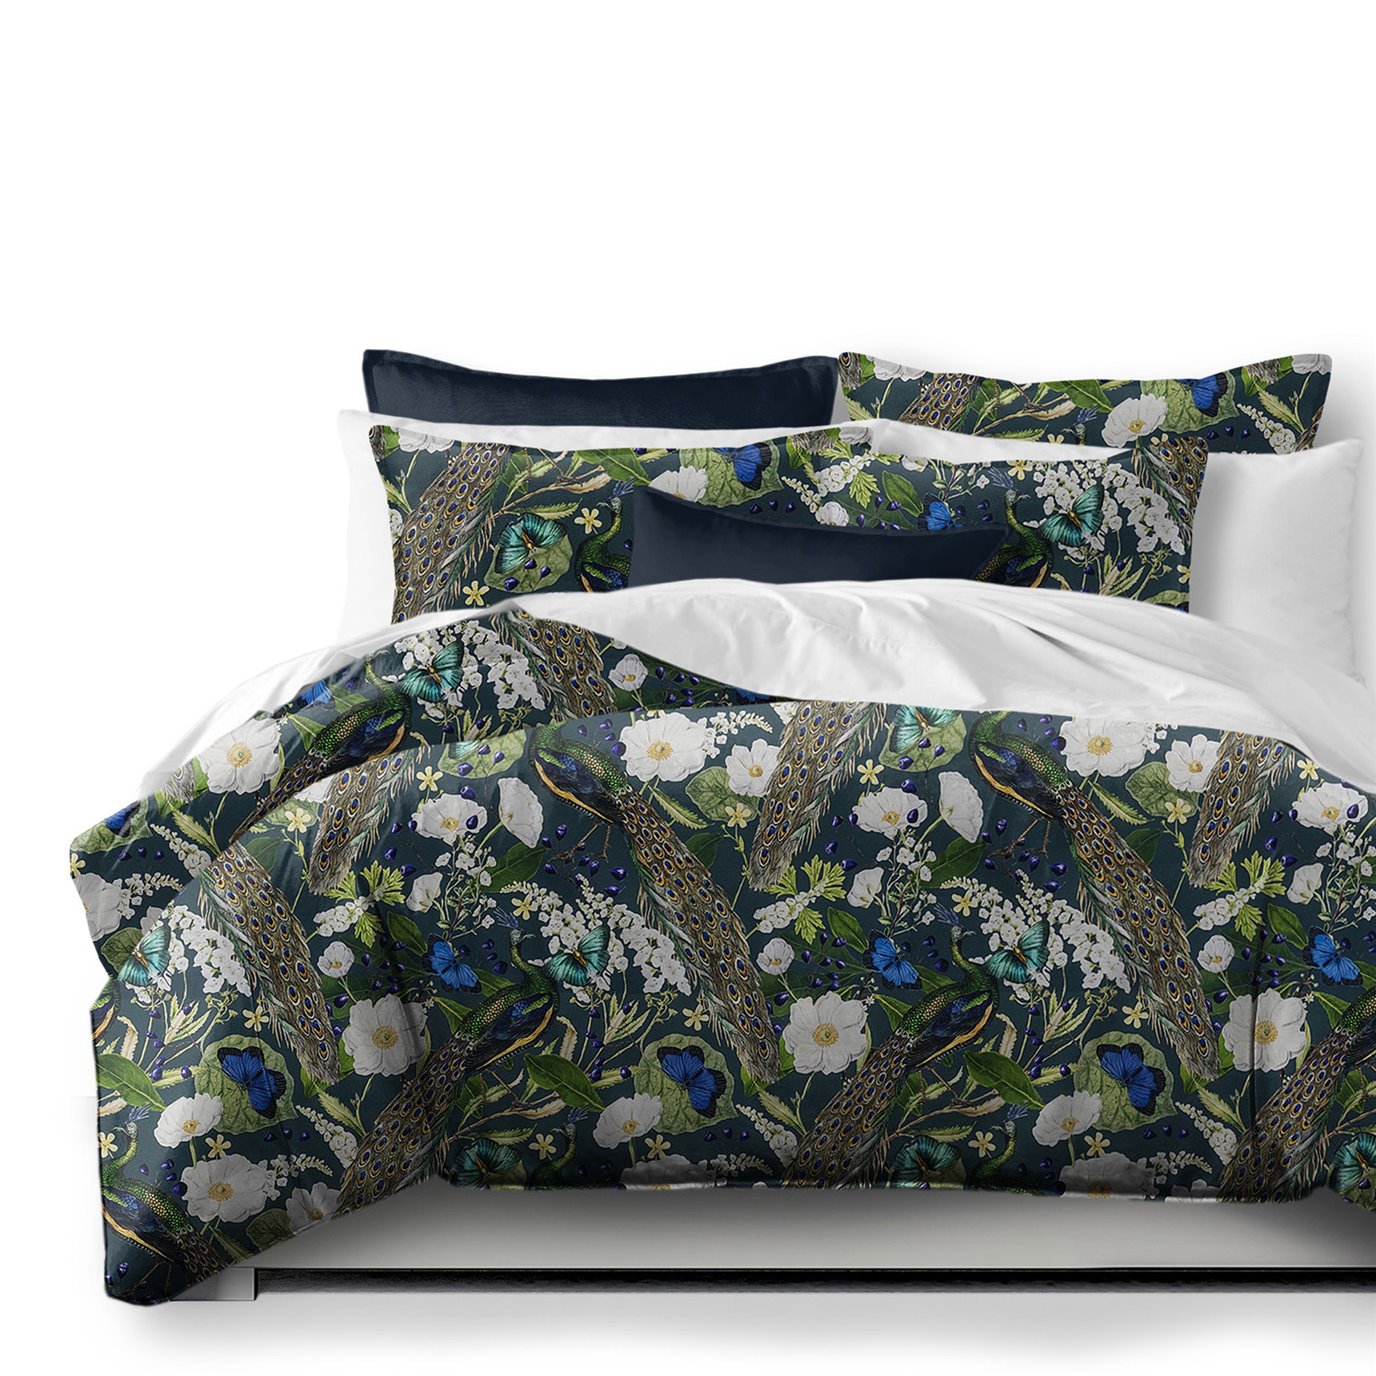 Peacock Print Teal/Navy Duvet Cover and Pillow Sham(s) Set - Size Super Queen